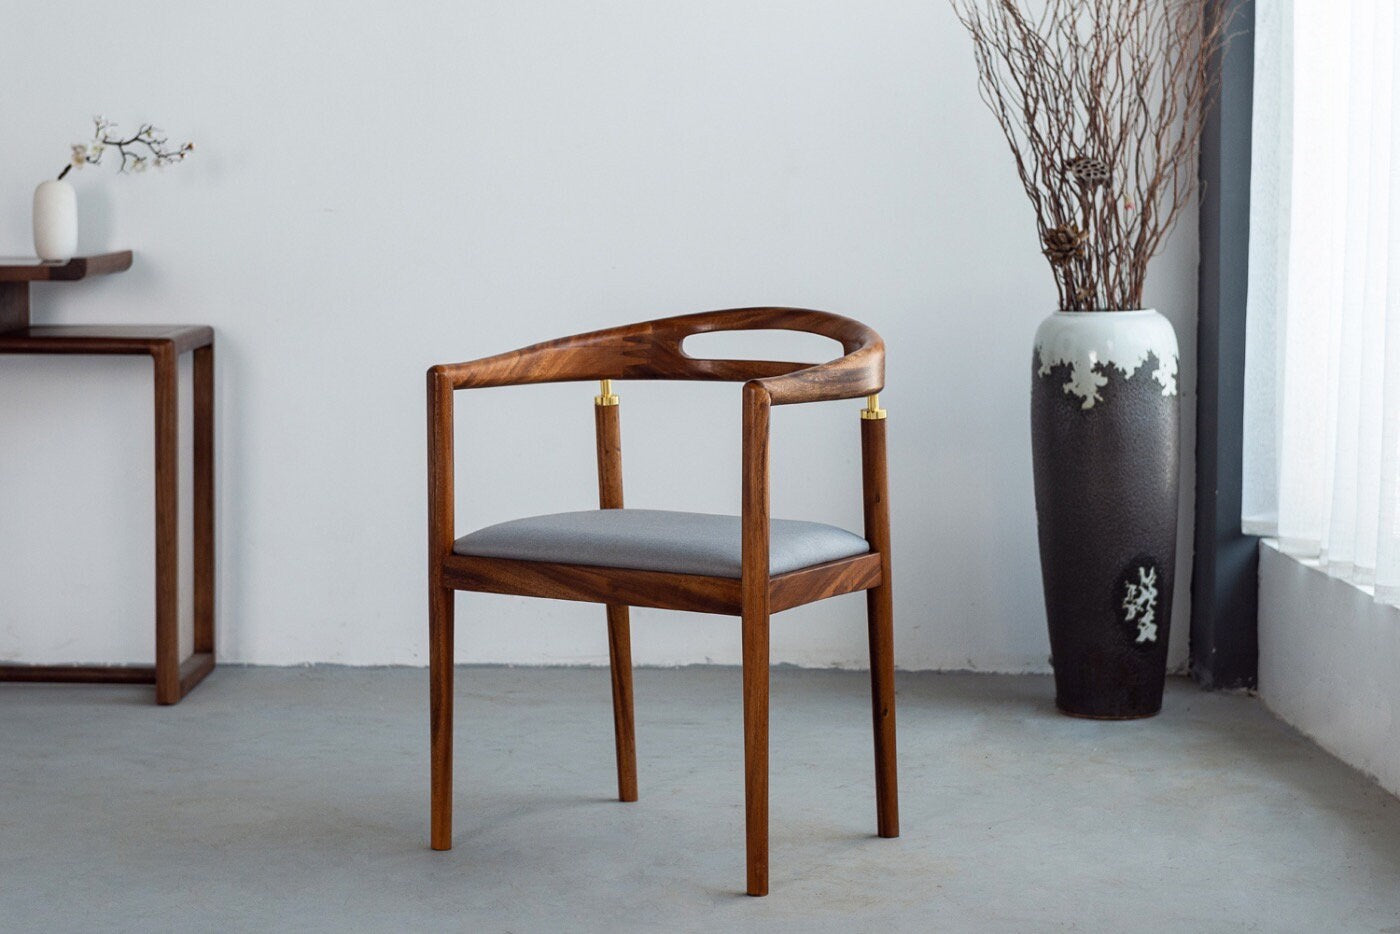 special design chair, leather wood chair, leather chair, wood chair, walnut chair